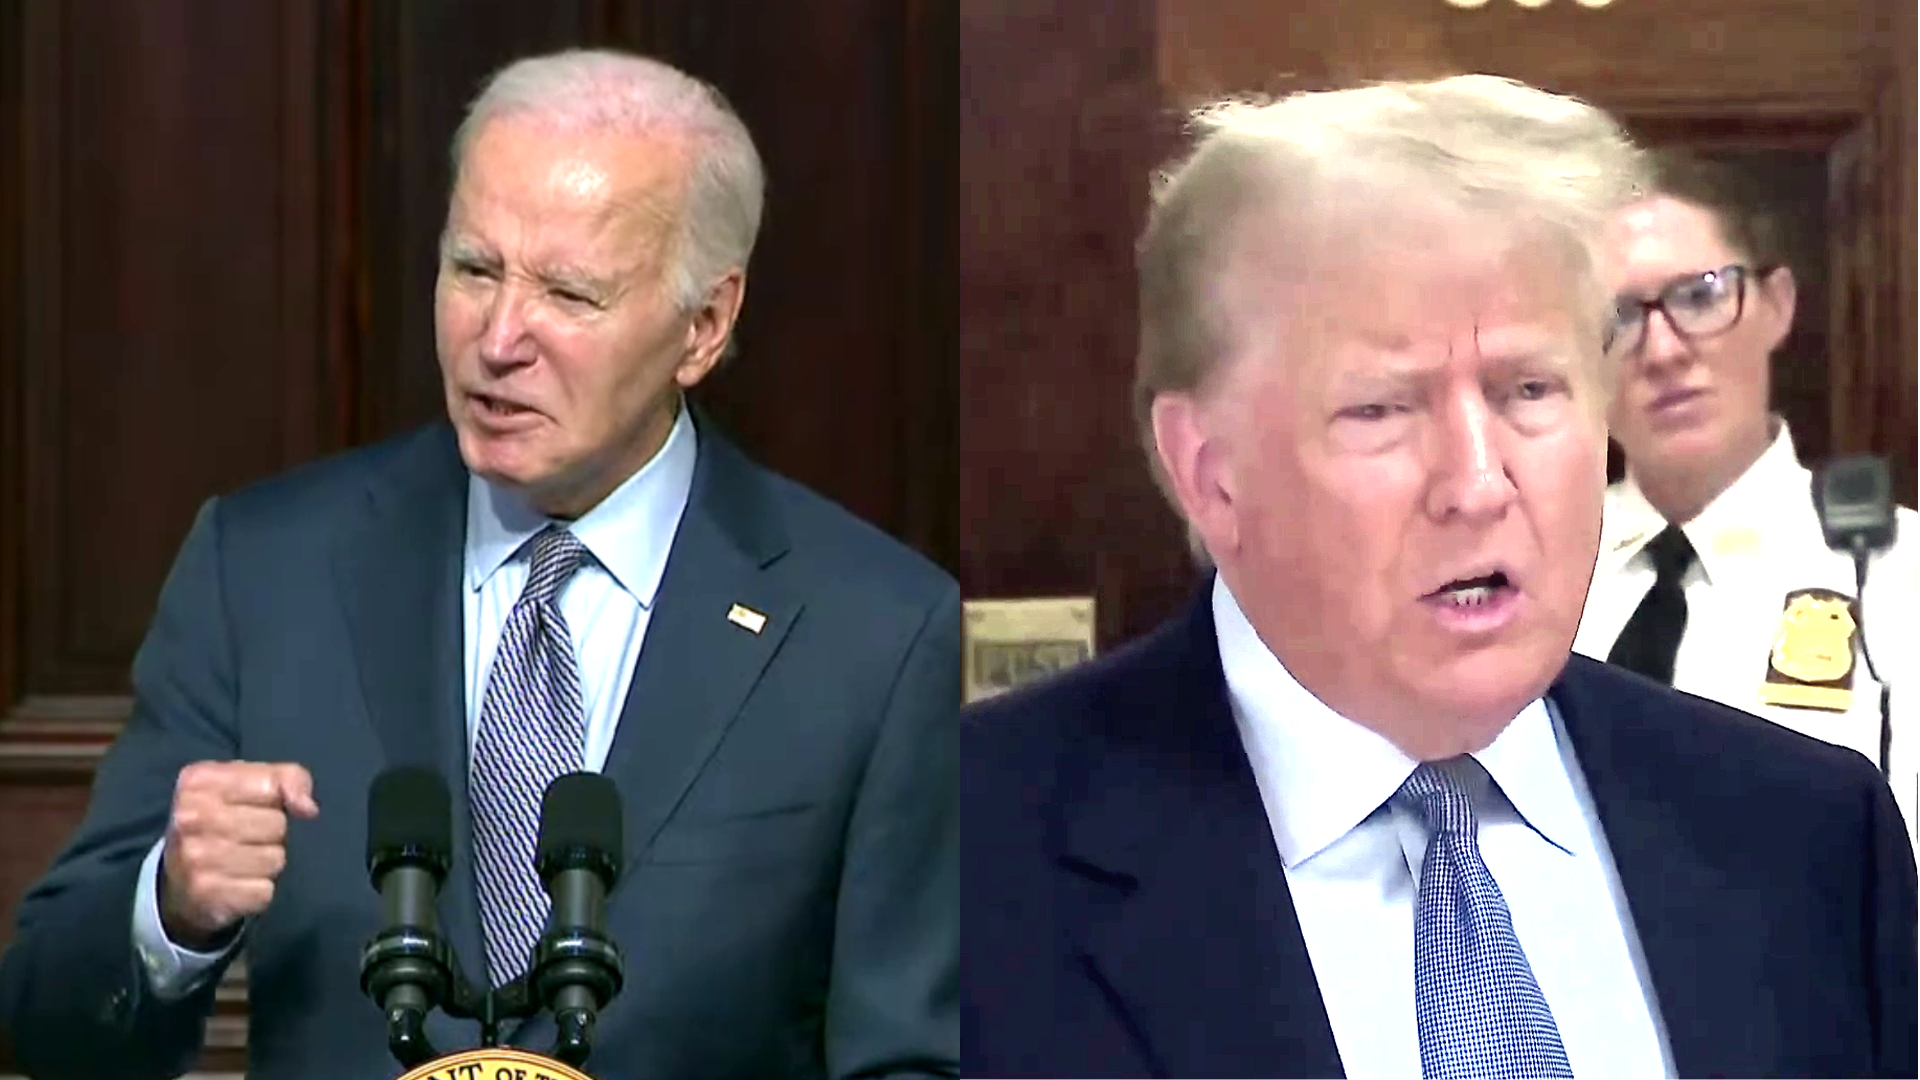 Fired-Up Biden Pounds Fist As He Blasts Trump and Denounces ‘Political Violence’ at Private Fundraiser (mediaite.com)